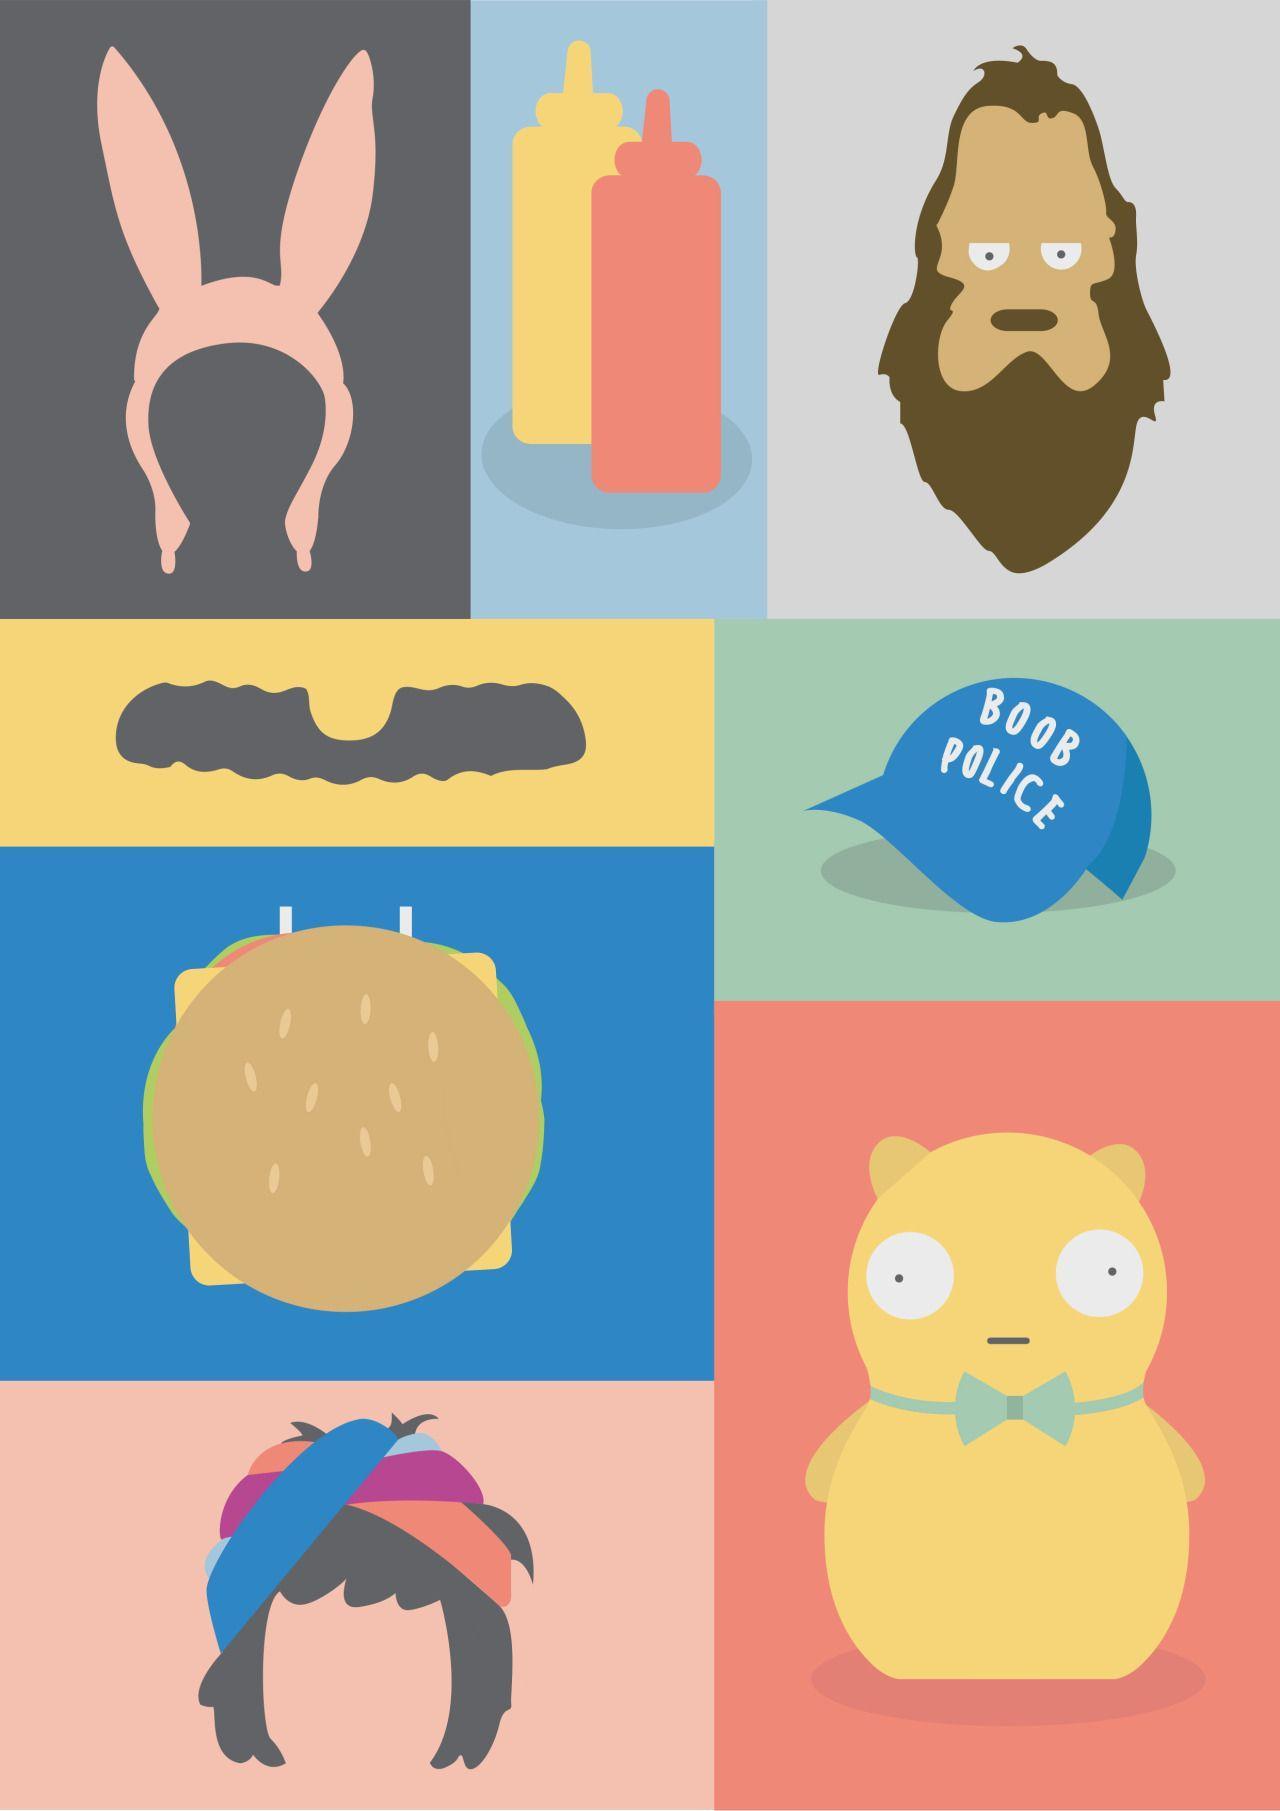 Bobs Burgers iphone 5 wallpaper by BrittanyEffect on DeviantArt